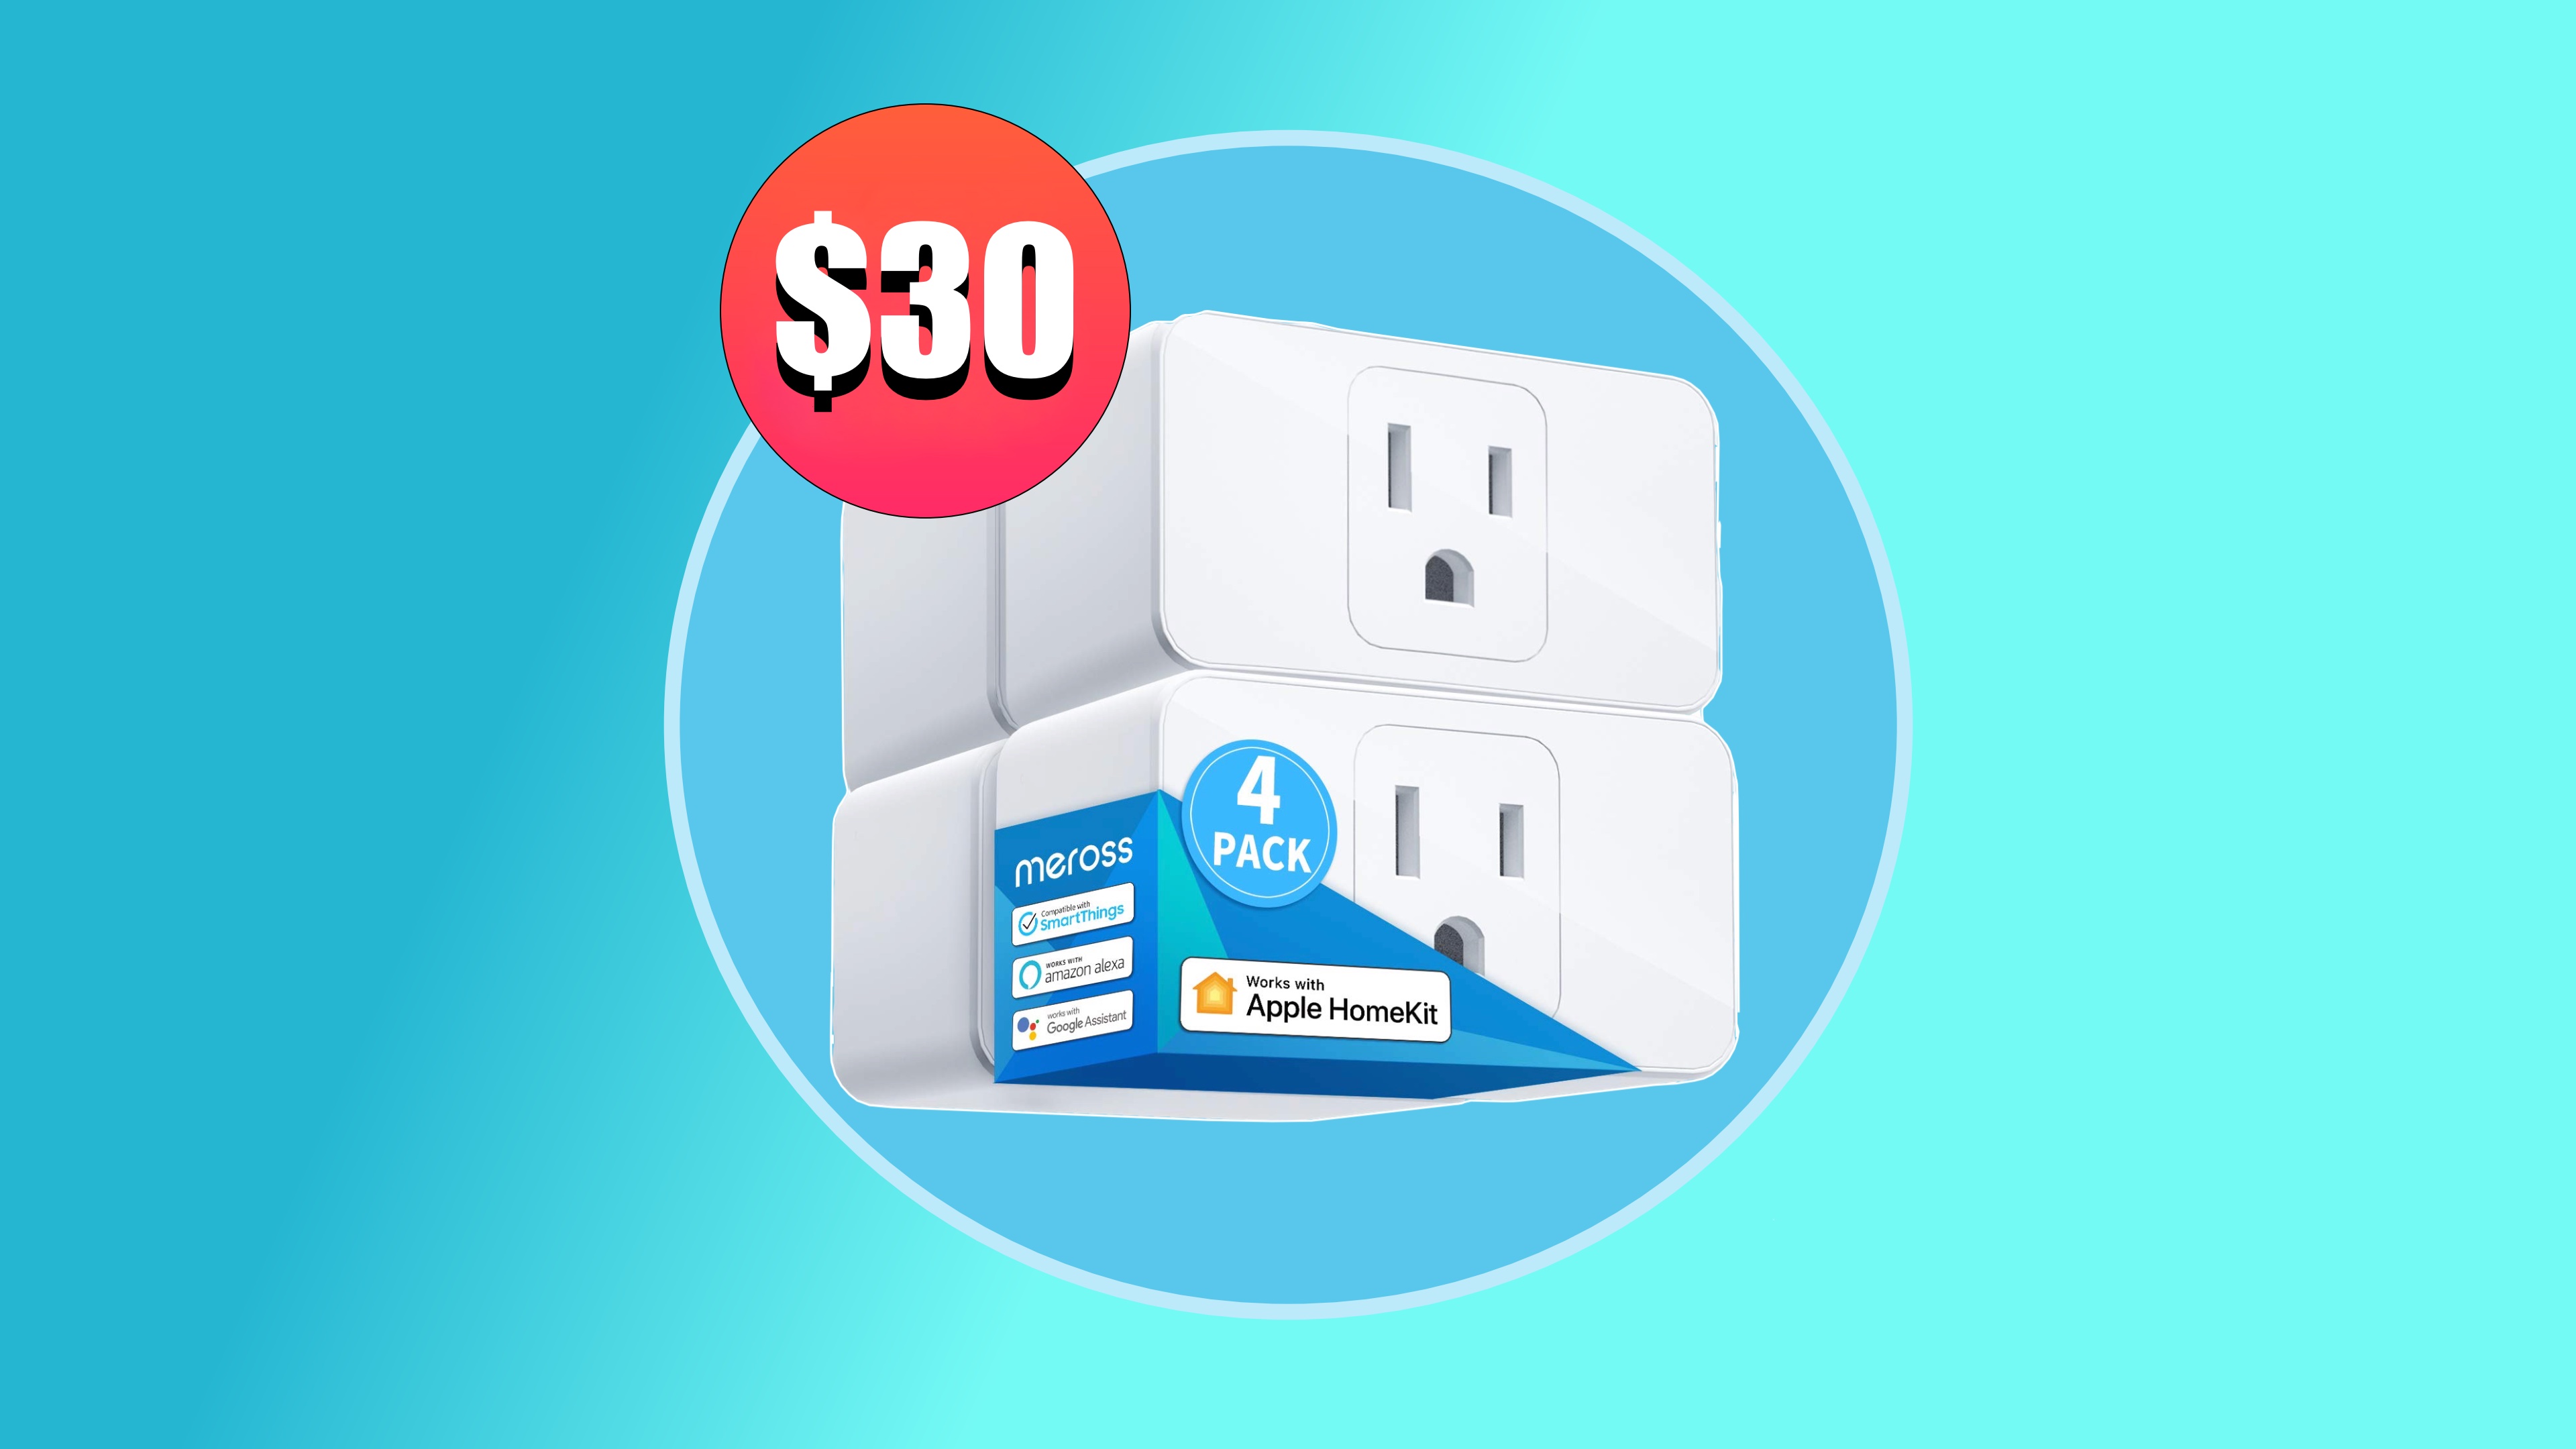 Get this 4-pack of HomeKit smart plugs for just $30